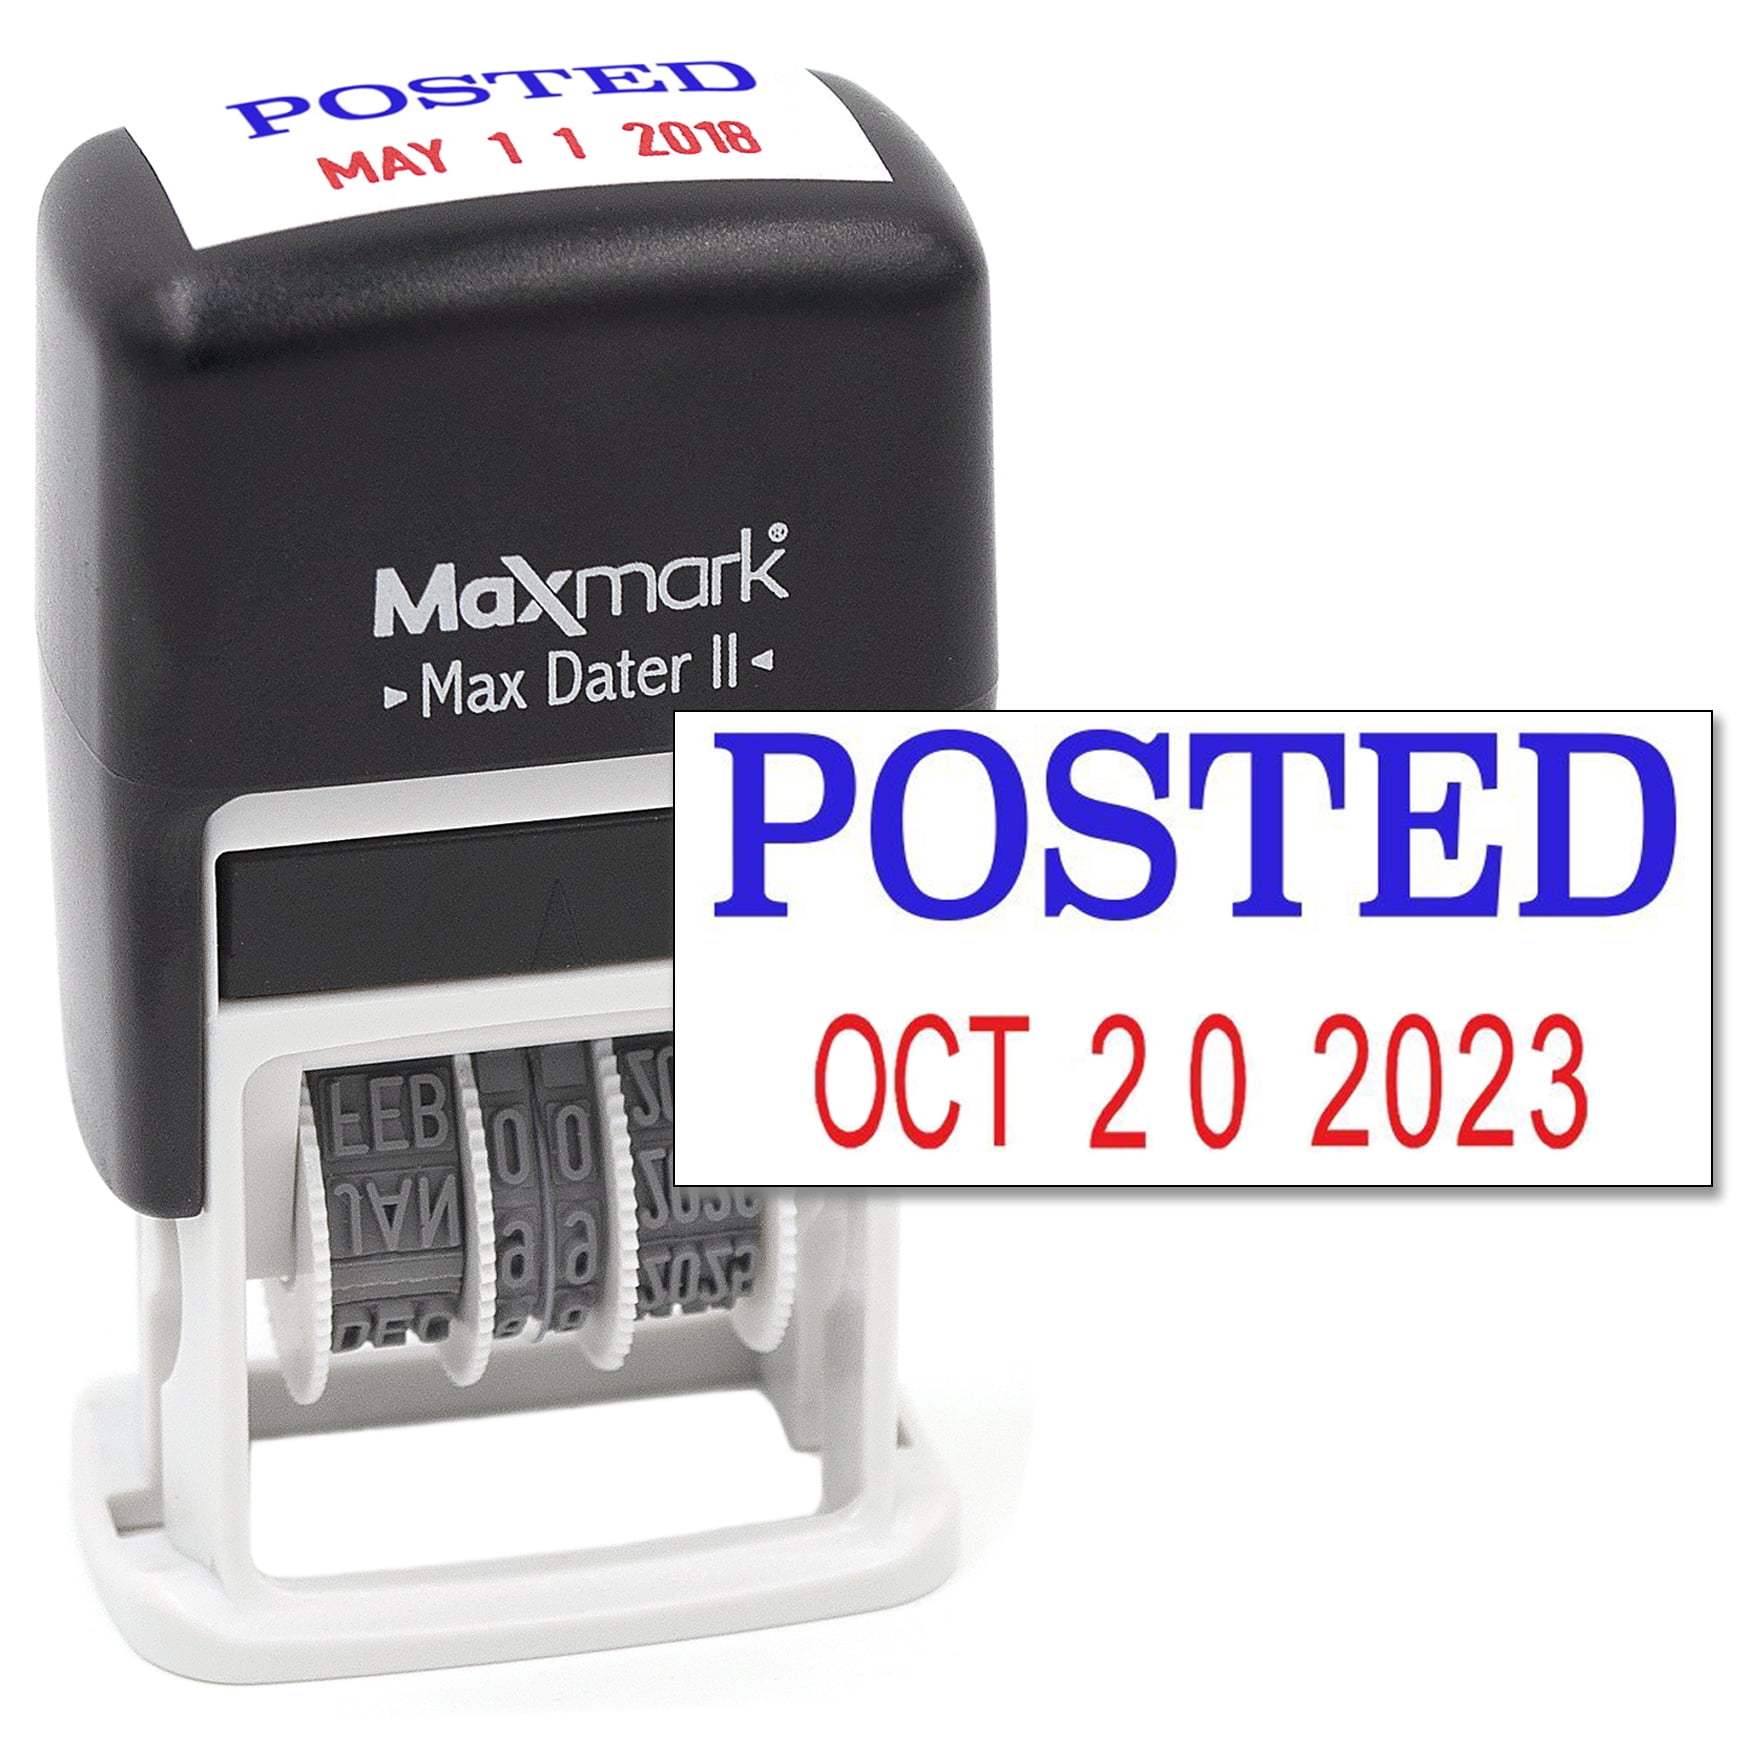 RETURNED Office Self Inking Rubber Stamp E-5616 Red Ink 